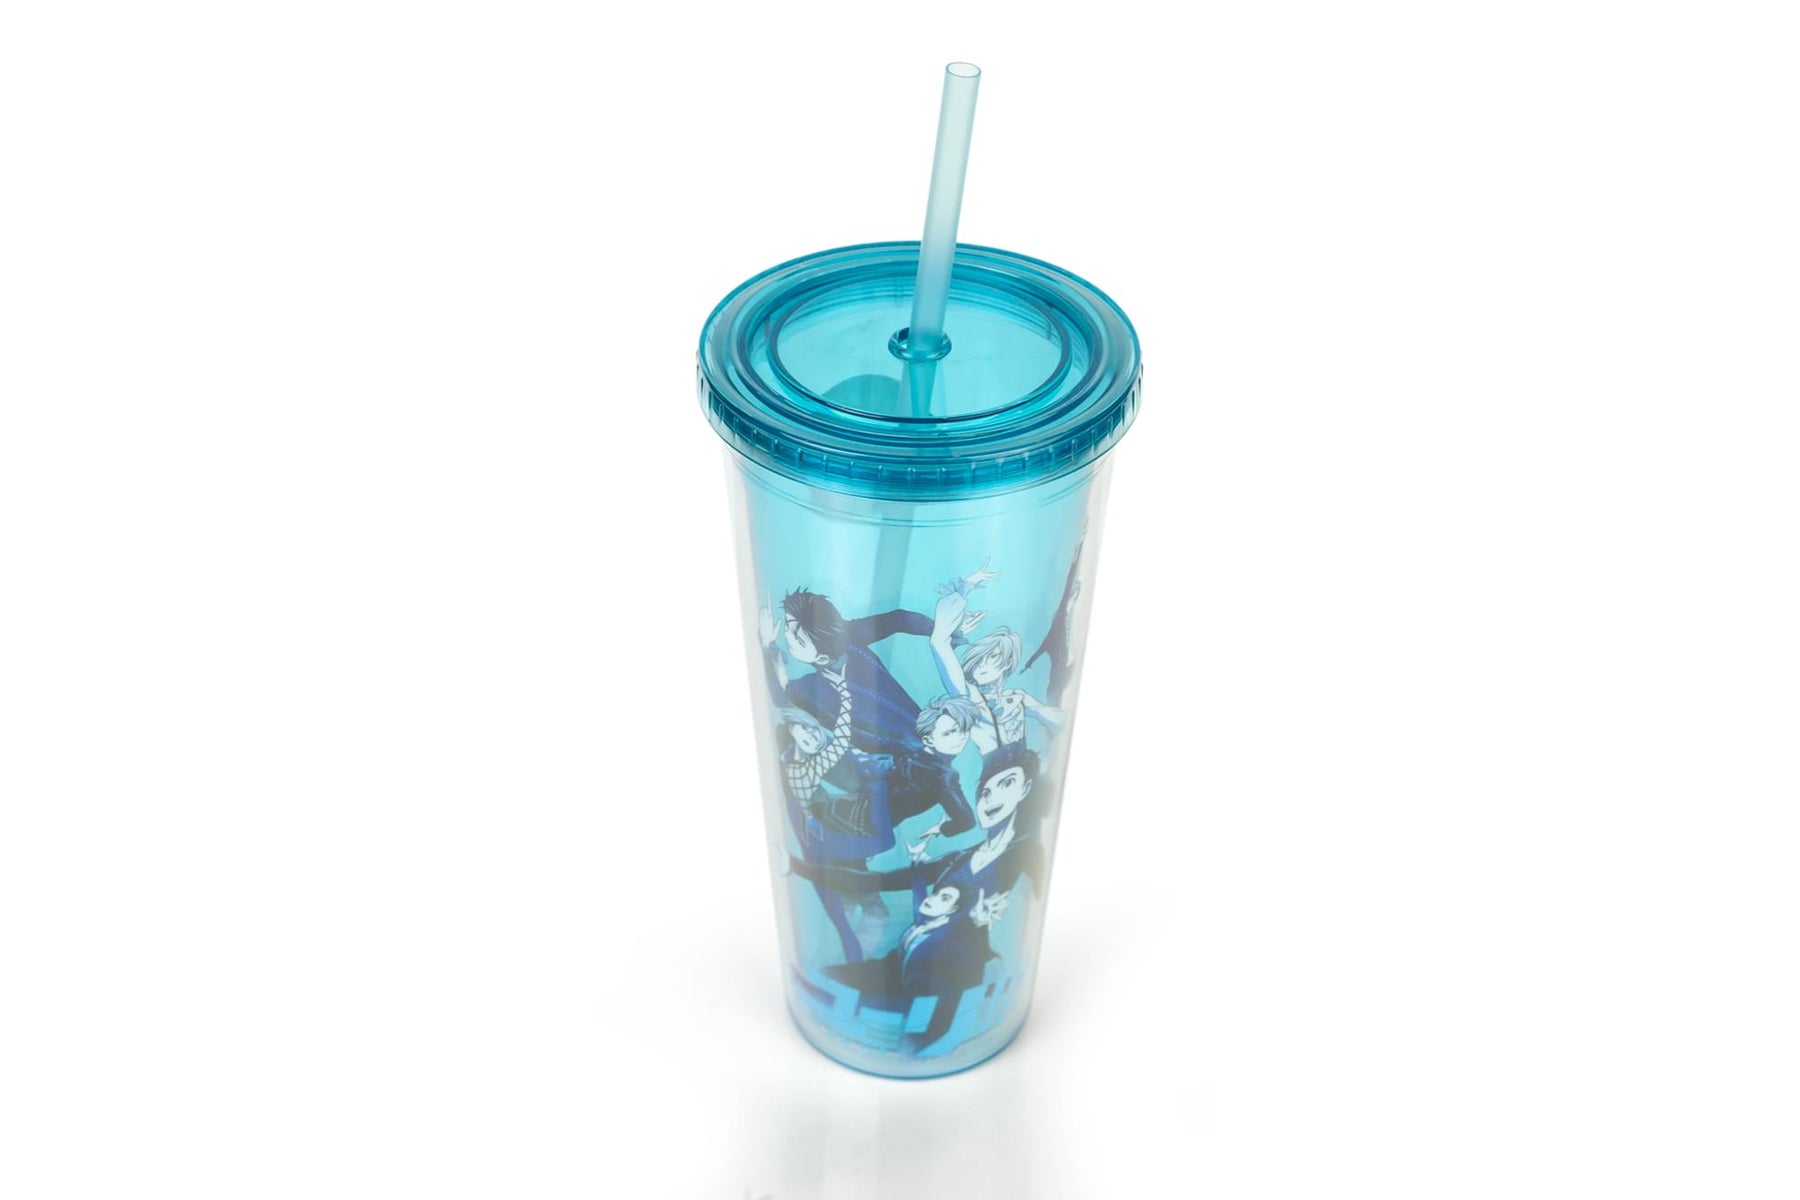 Yuri On Ice Characters Plastic Tumbler Cup With Lid & Straw | Holds 16 Ounces